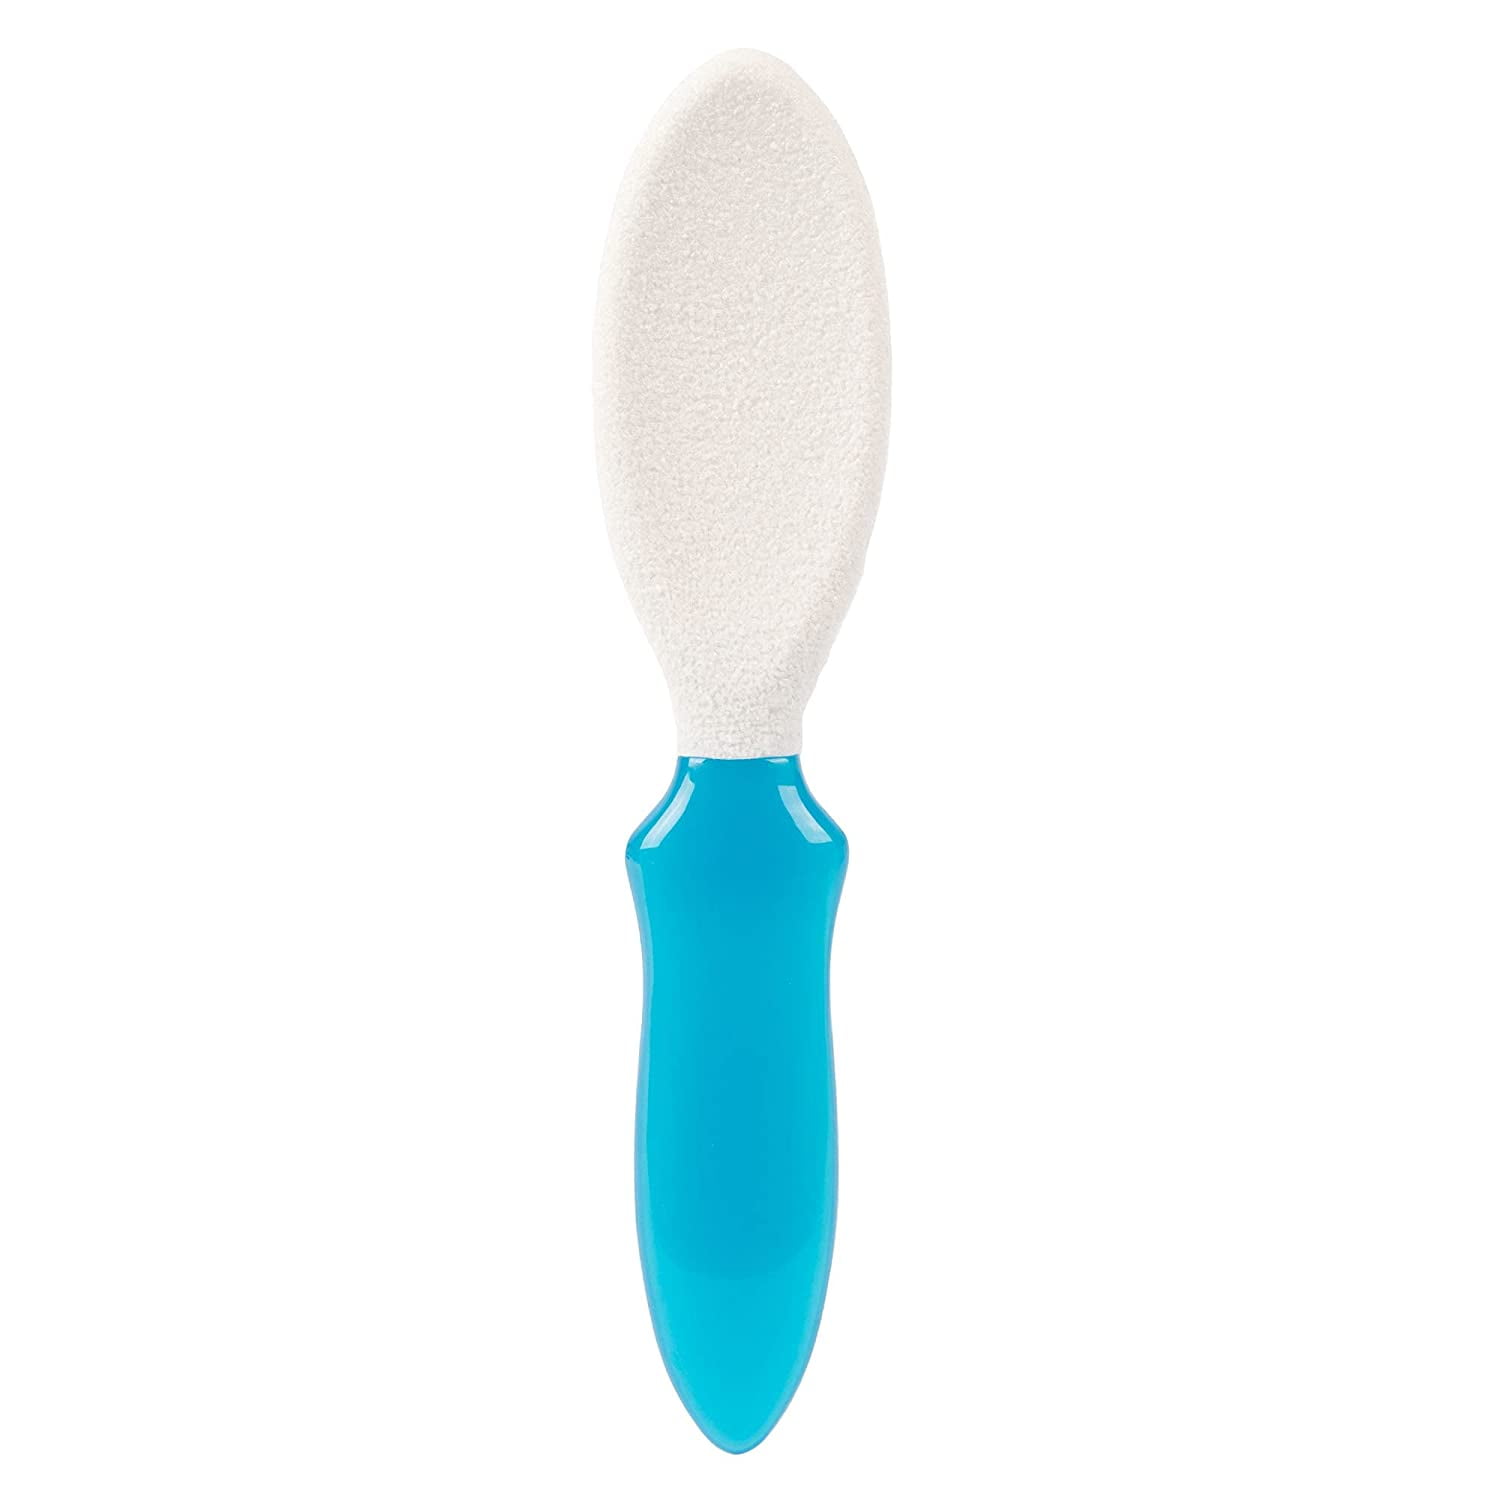 Simply Foot Exfoliating Stone Foot File – 360-Degree Abrasive Surface for Smooth Feet